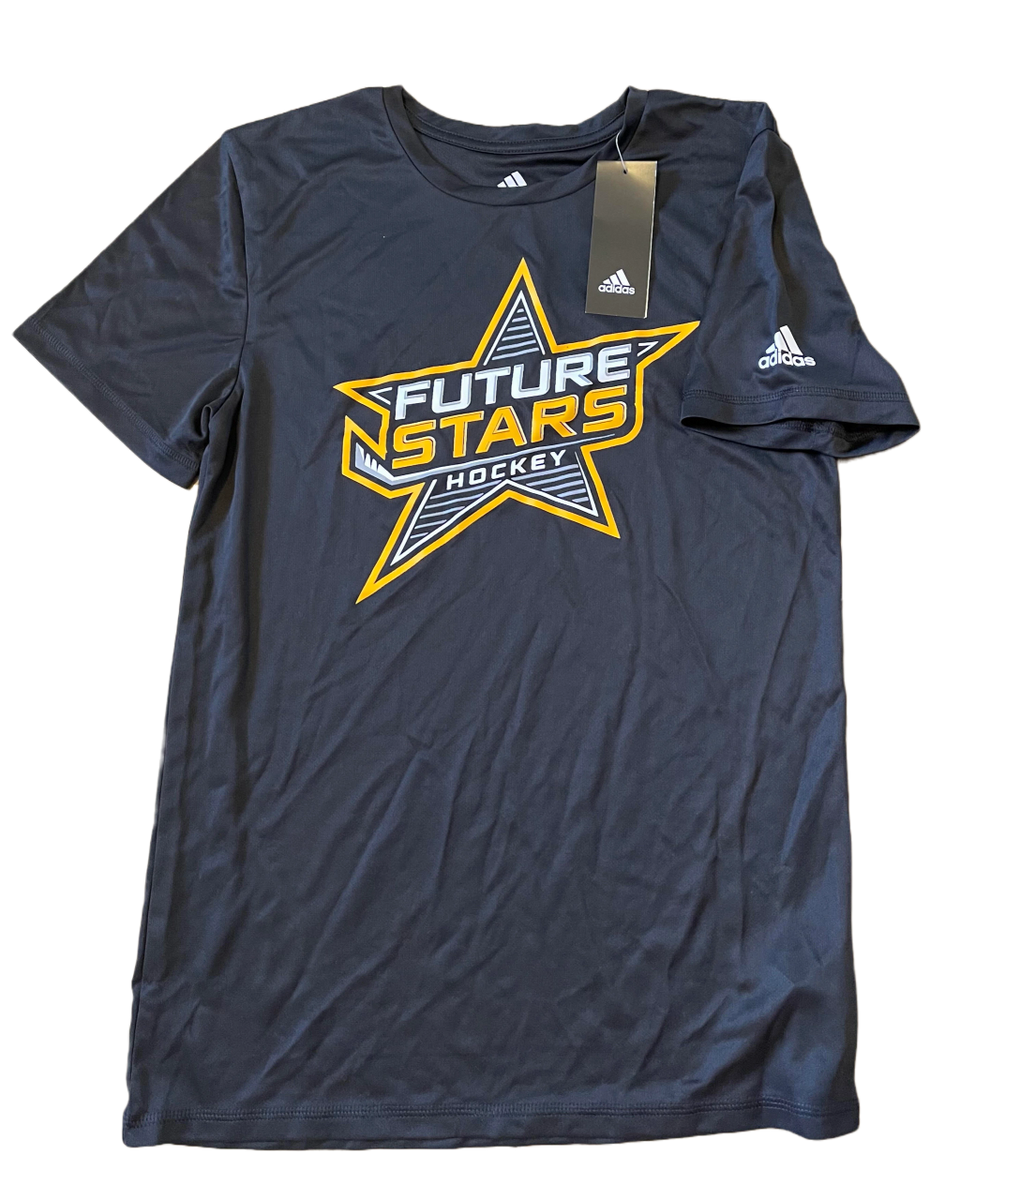 YOUTH Adidas Future Stars Game Day / Training Performance Dry Fit Shirt